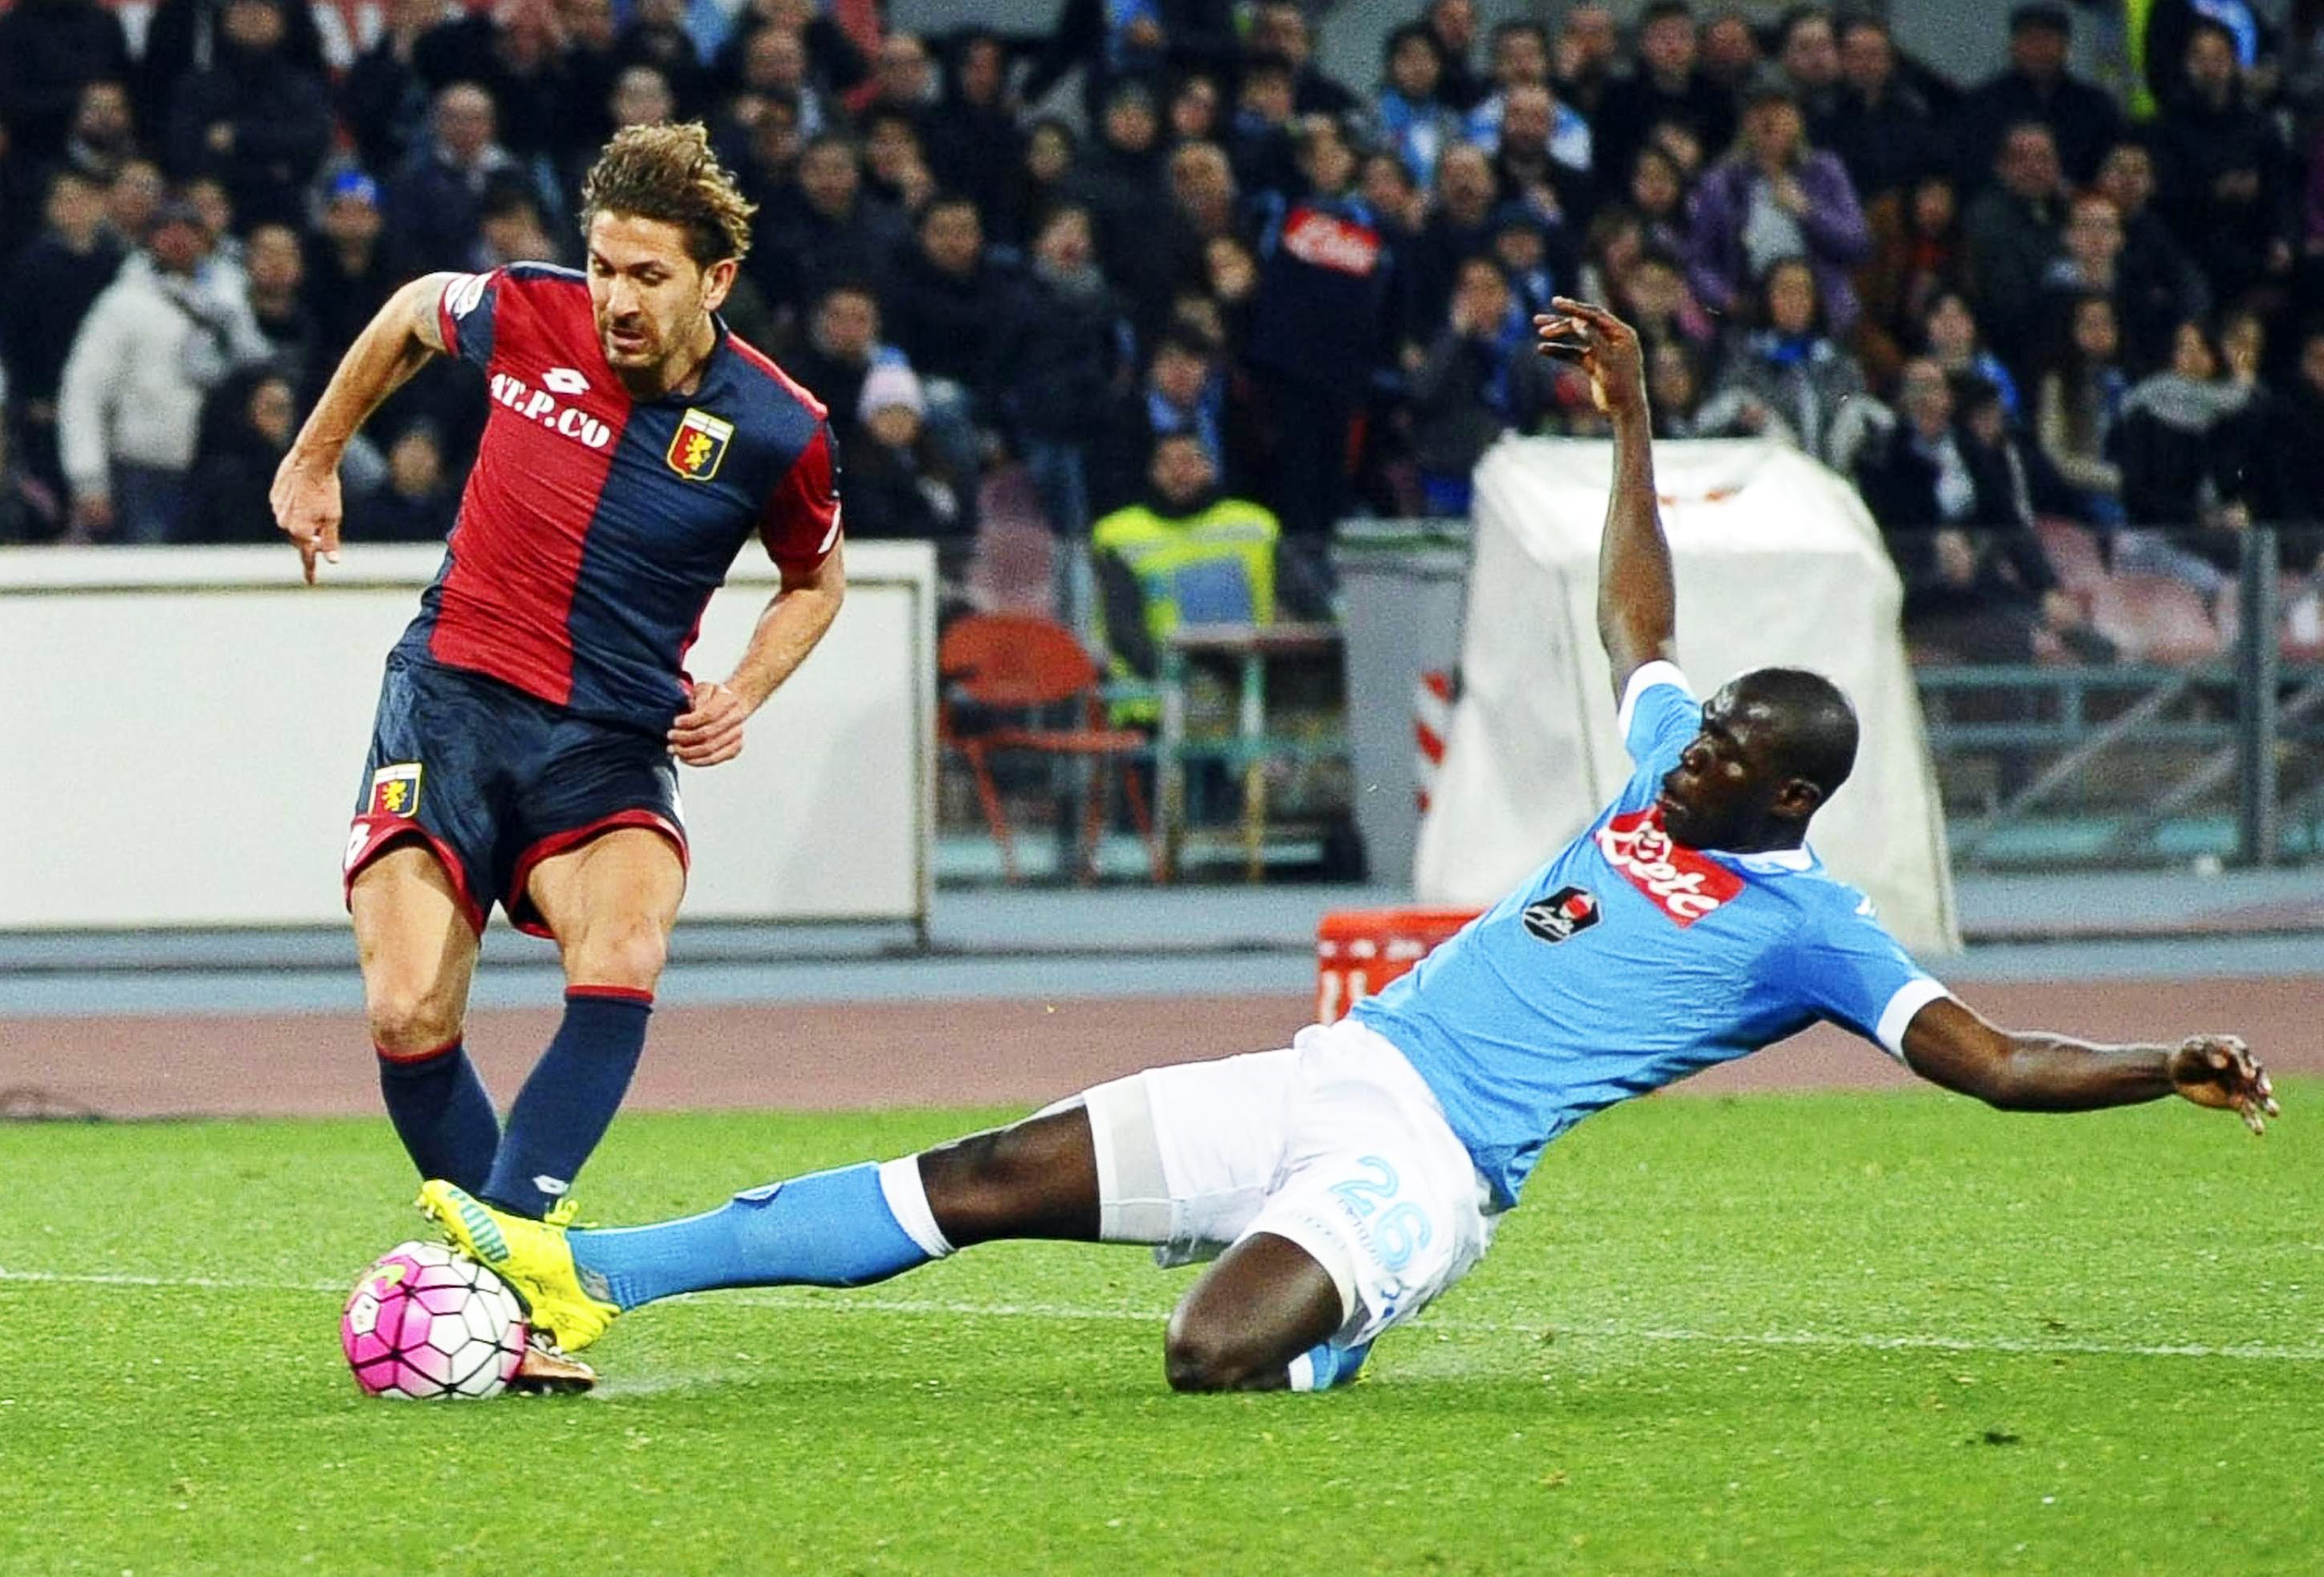 epa05223102 Napoli's defender Kalidou Koulibaly (R) in action against Genoa's forward Alessio Cerci (L) during the Italian Serie A soccer match between SSC Napoli and CFC Genoa 1893 at San Paolo Stadium in Naples, Italy, 20 March 2016.  EPA/CIRO FUSCO